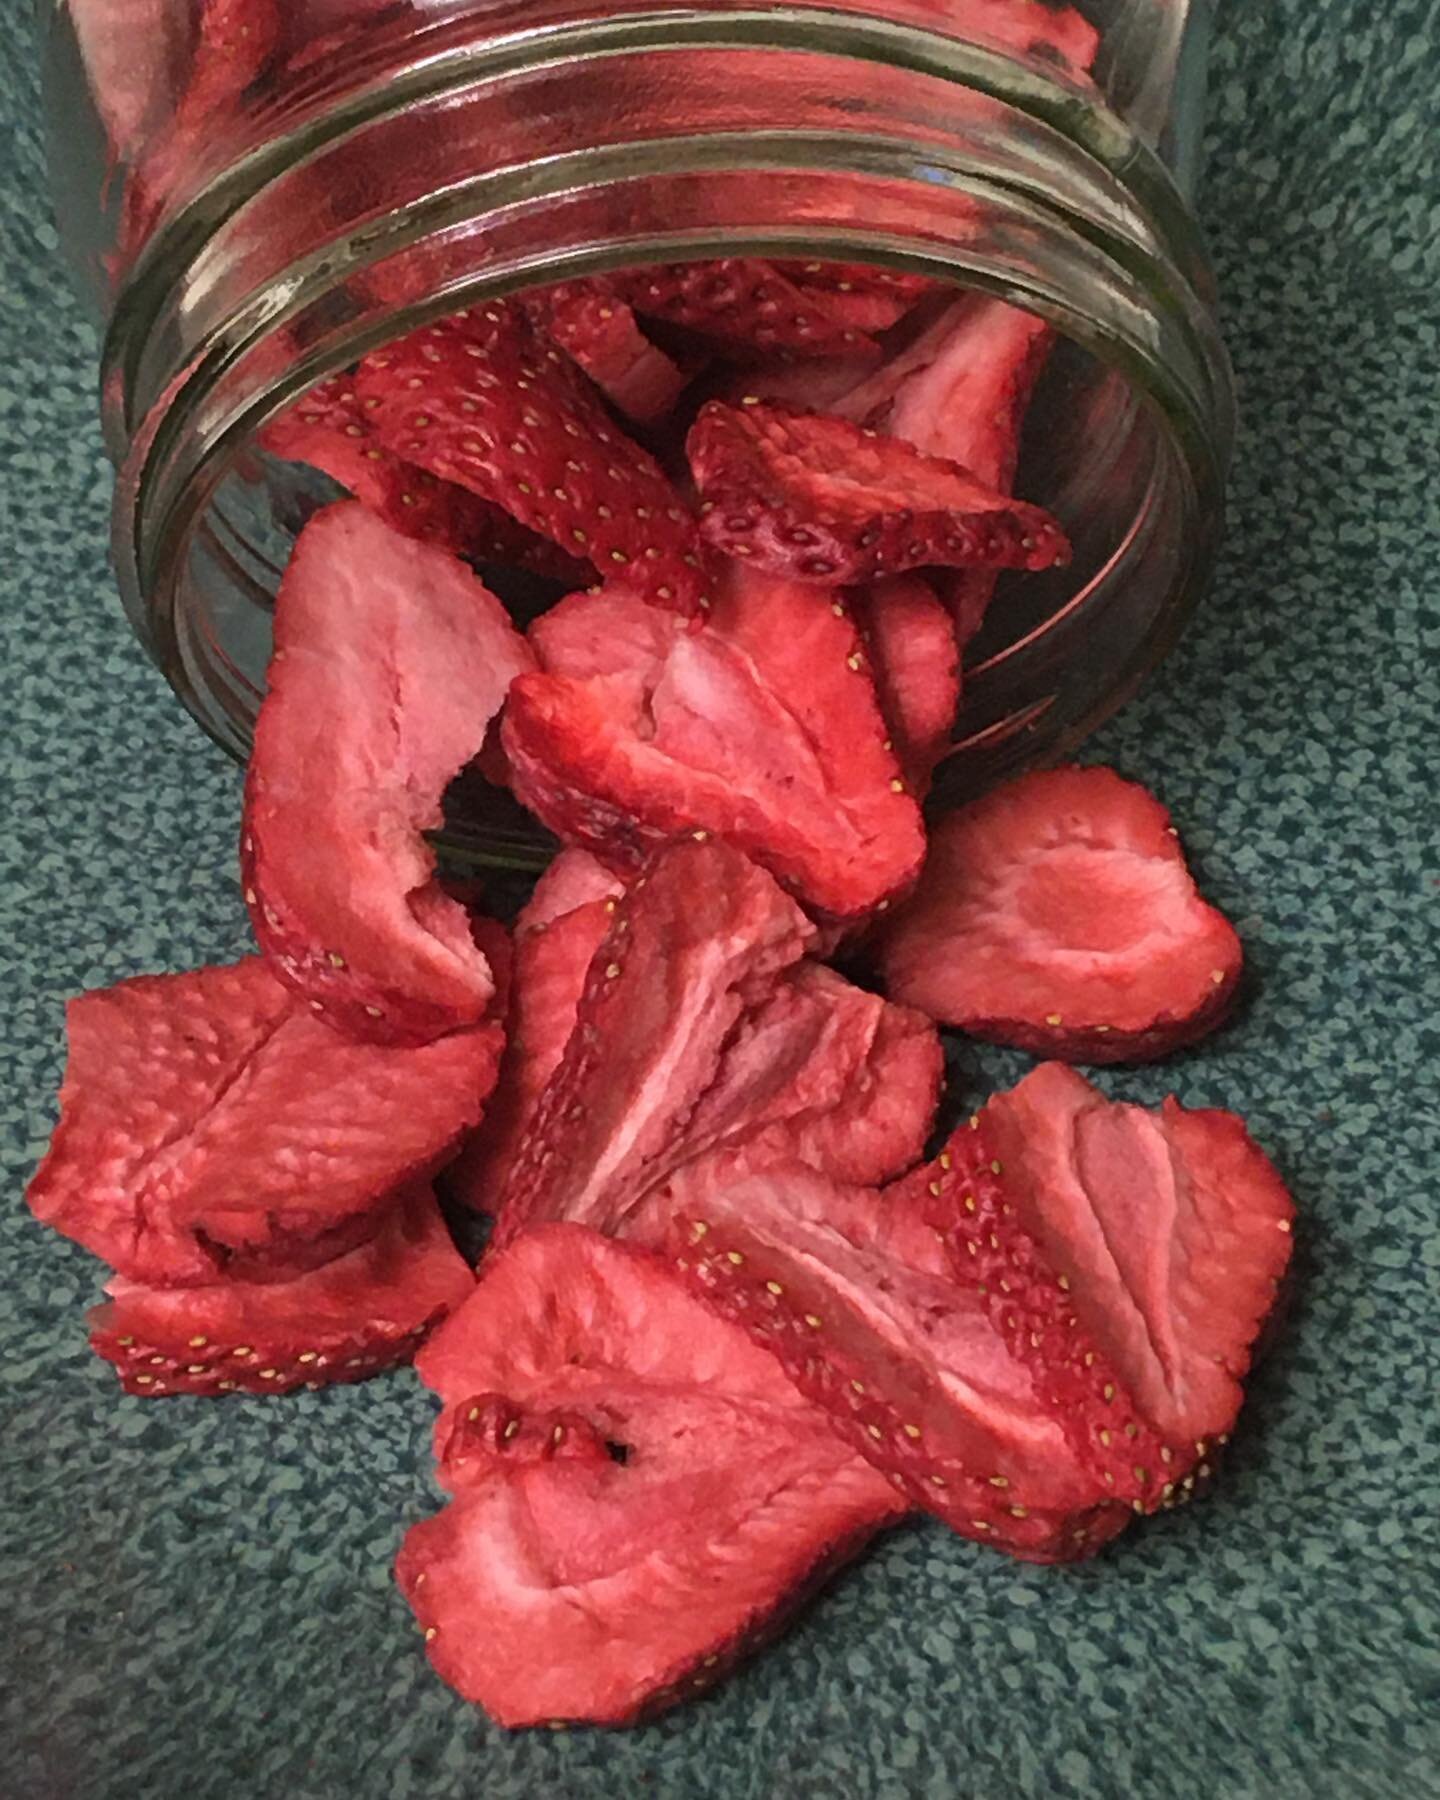 It&rsquo;s #strawberry season! Locally grown organic freeze dried strawberries! We can&rsquo;t keep up- get em while their hot! DM for sales and availability! 

#freezedry #freezedriedstrawberries #localbusiness #familyownedandoperated #familyowned #